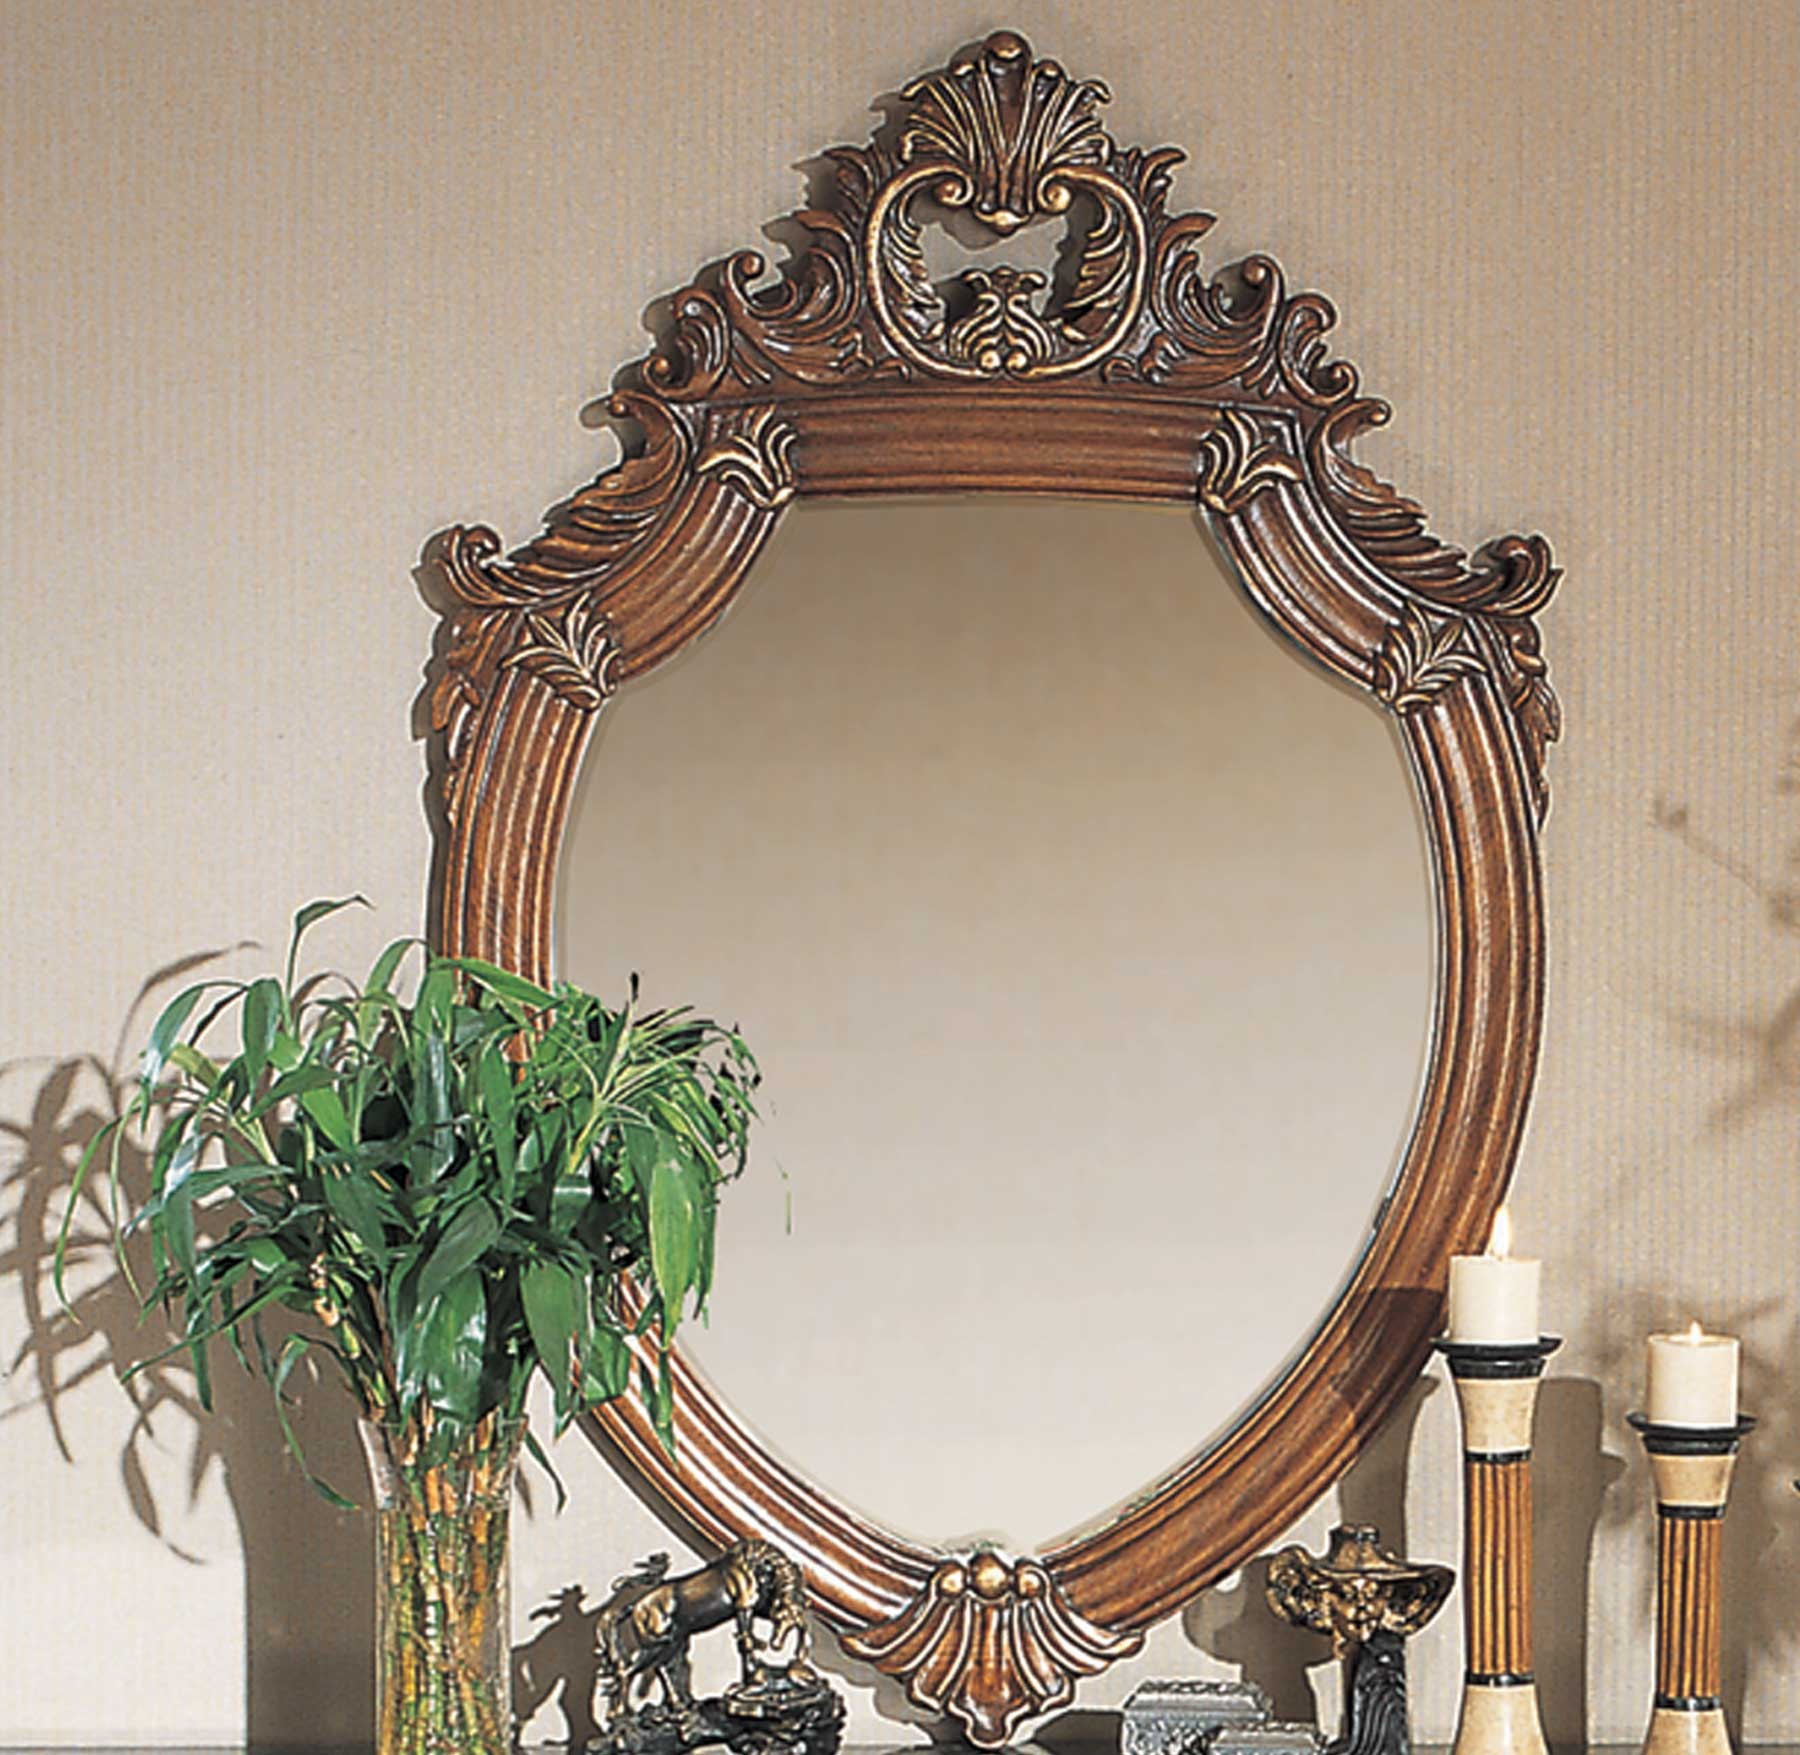 Waterford Accent Mirror shown in in Mahogany finish